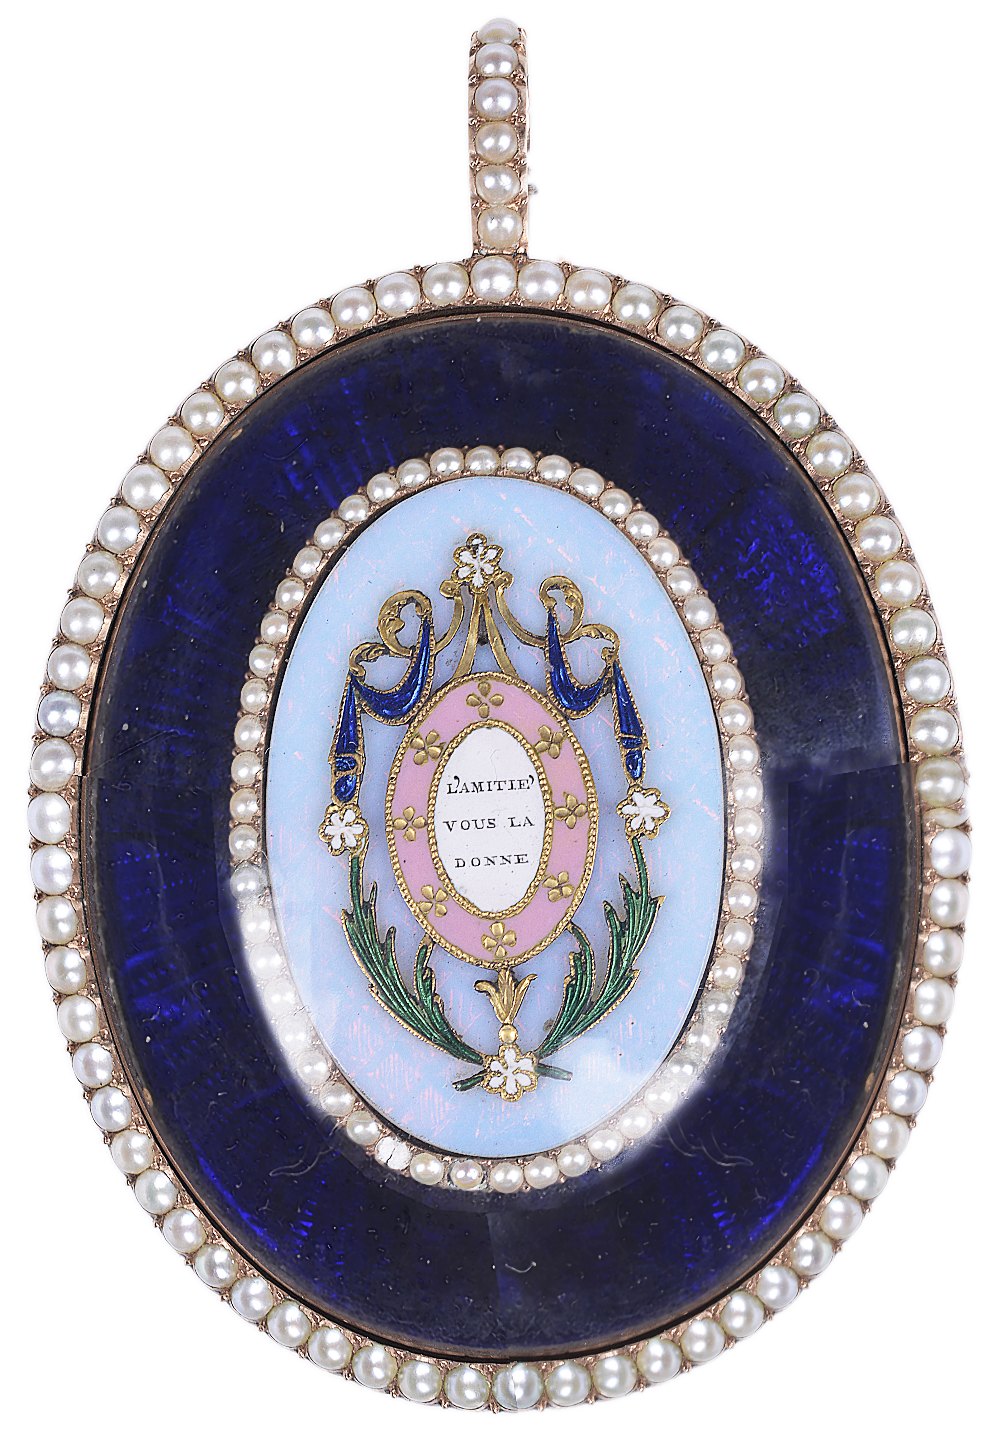 A GOLD AND SPLIT PEARL MINIATURE FRAME, ENGLISH, CIRCA 1790 oval, the oval opalescent central